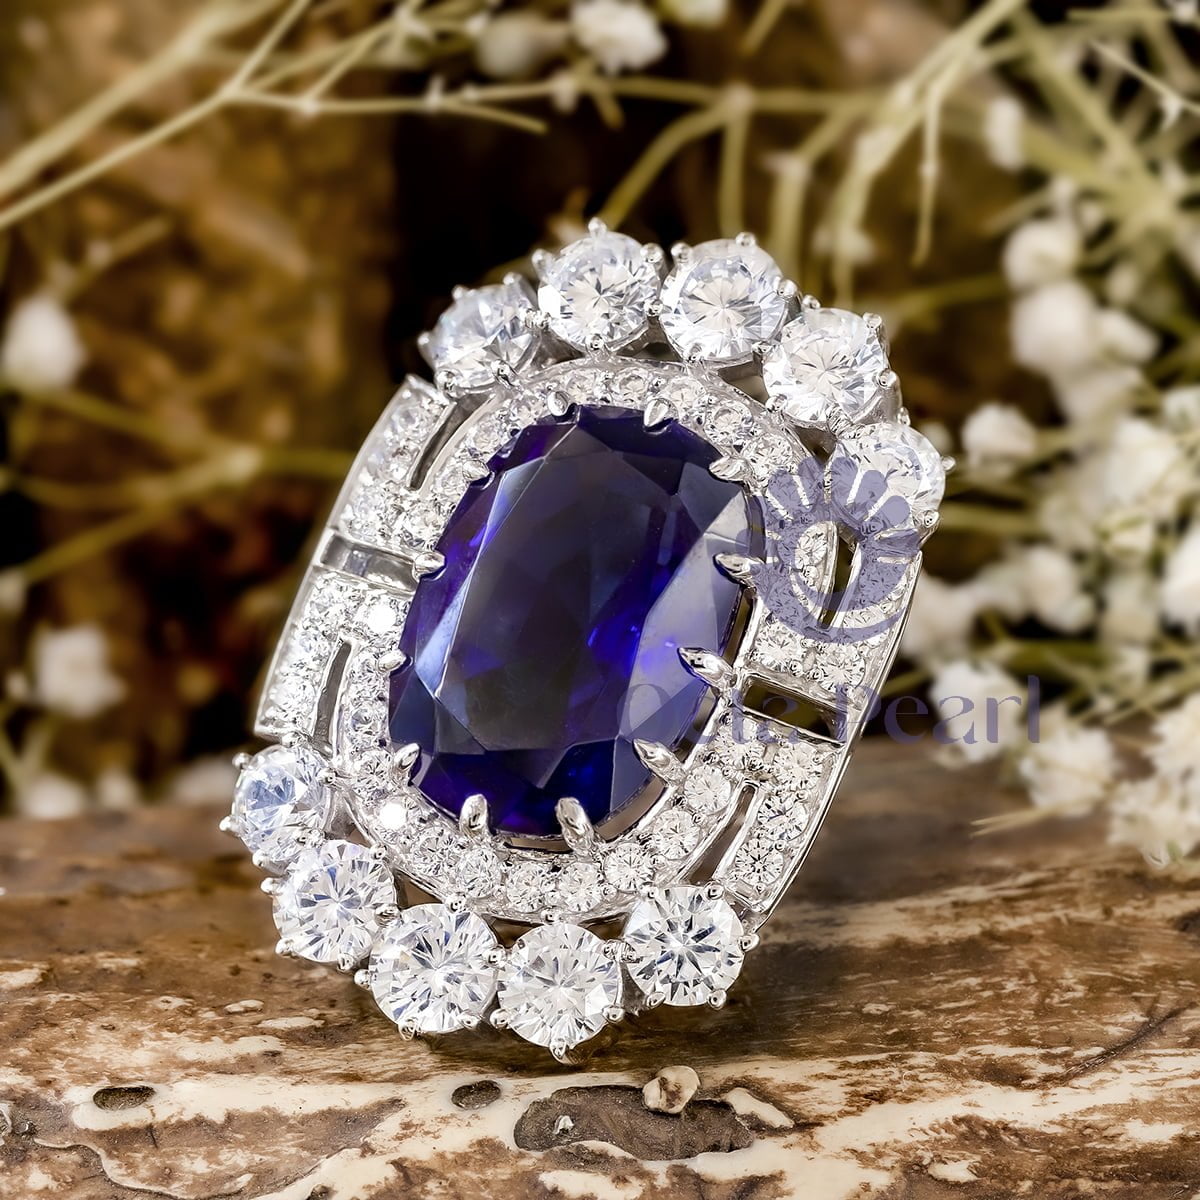 Blue Sapphire Oval With Round Cut CZ Stone Royal Look Pretty Brooch In 925 Silver